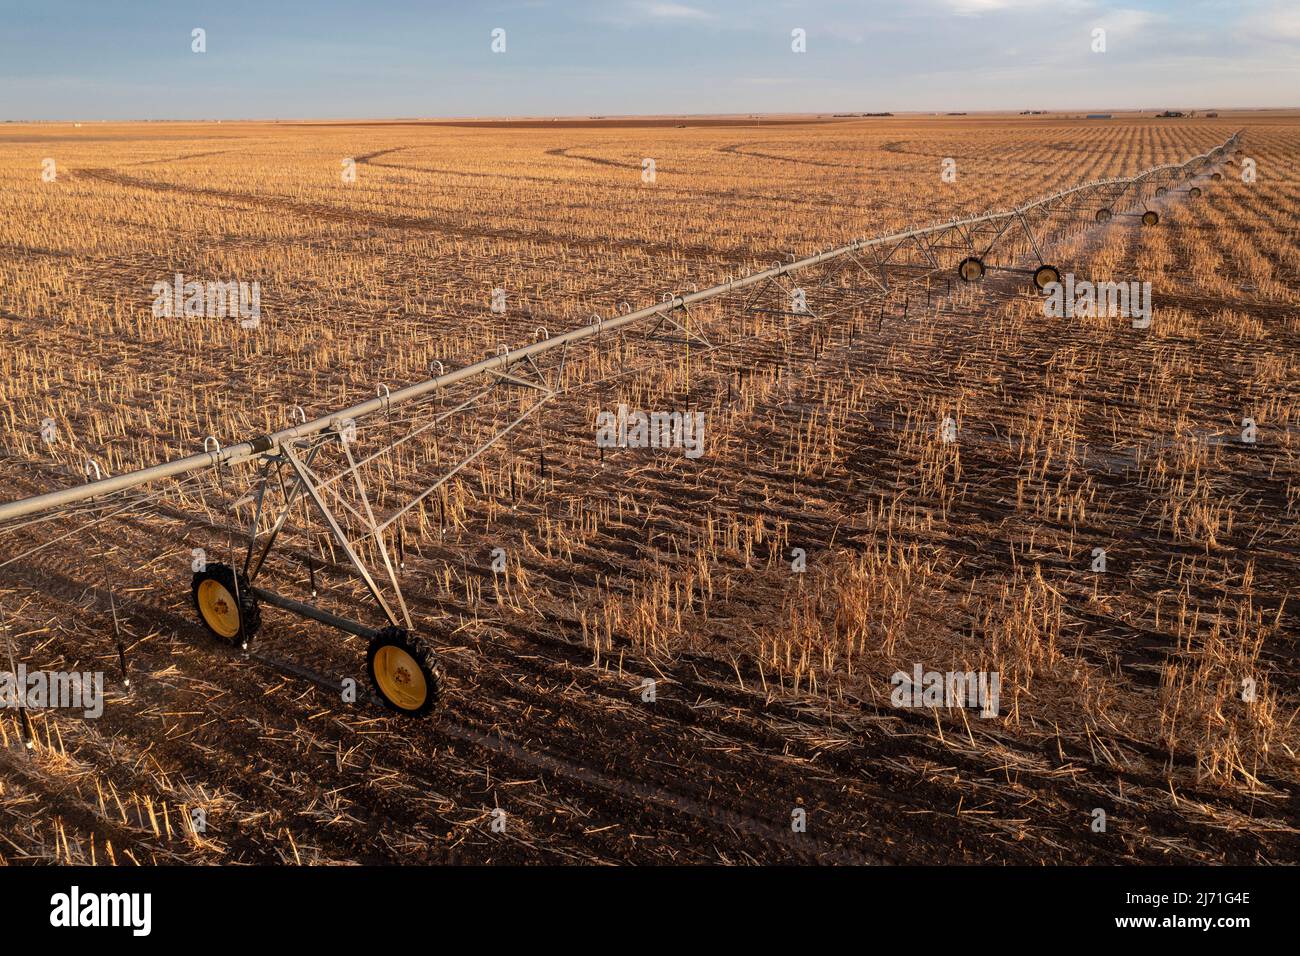 Turpin, Oklahoma - Center pivot irrigation equipment in early spring on a farm in the Oklahoma panhandle. Stock Photo